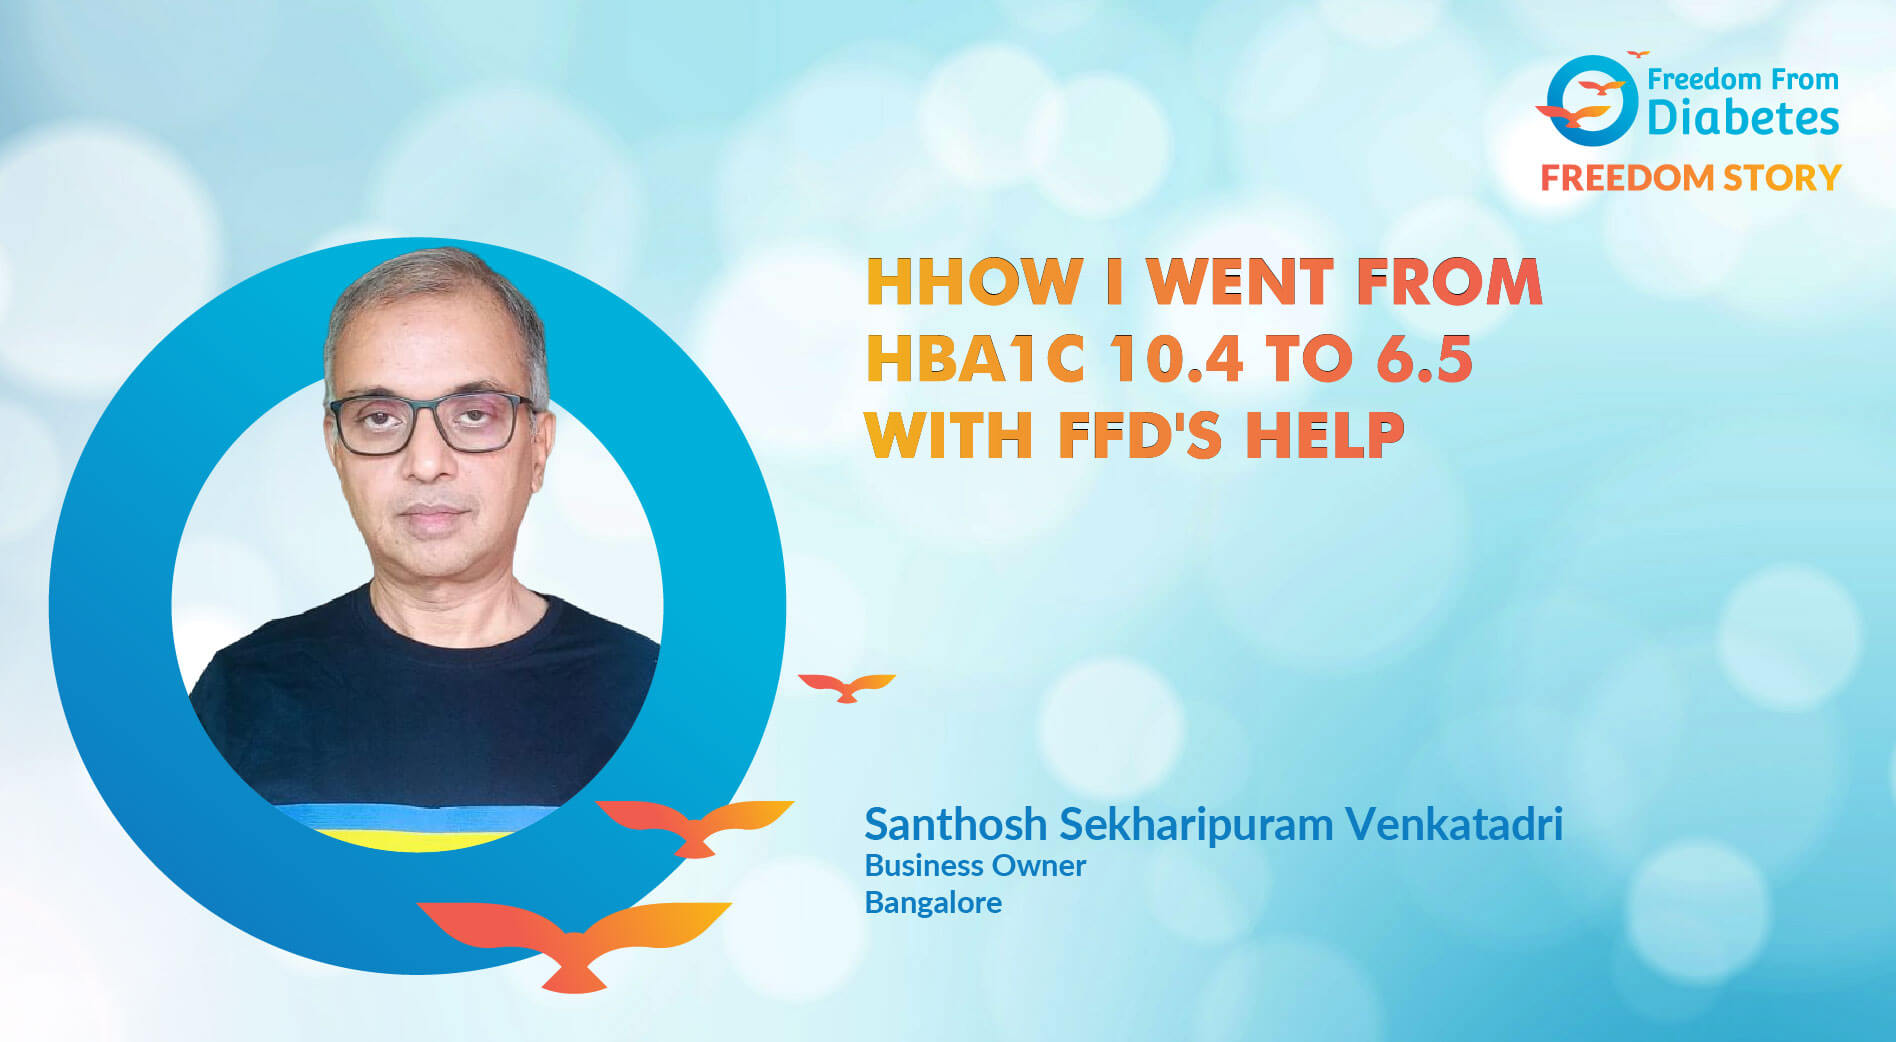 How I went from HbA1c 10.4 to 6.5 with FFD's help